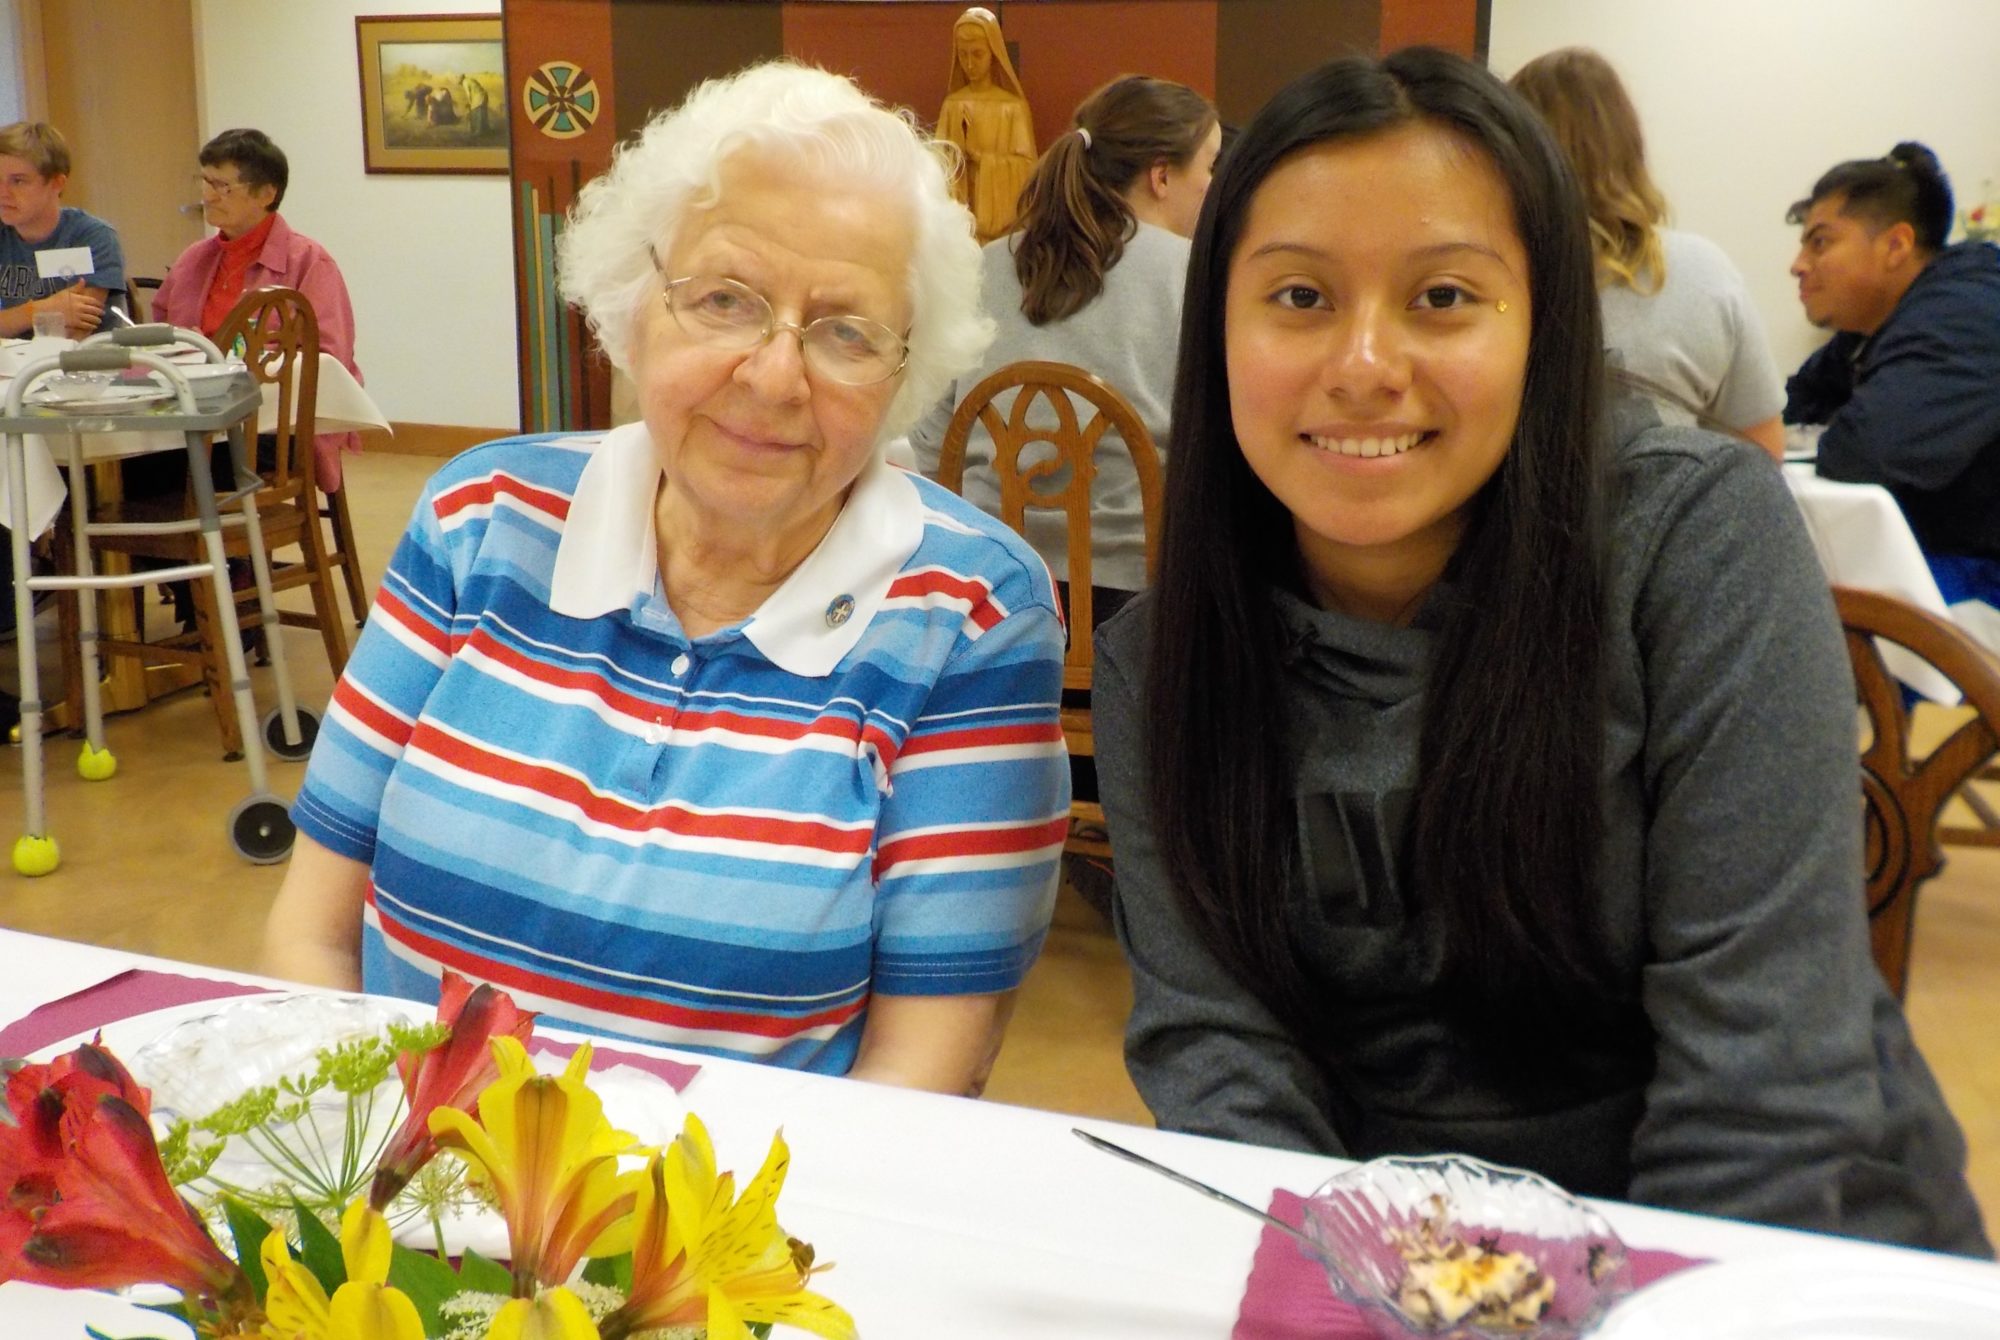 Sister Mary Catherine Shambour was mentor to one of the high school students at the Youth Theology Institute.